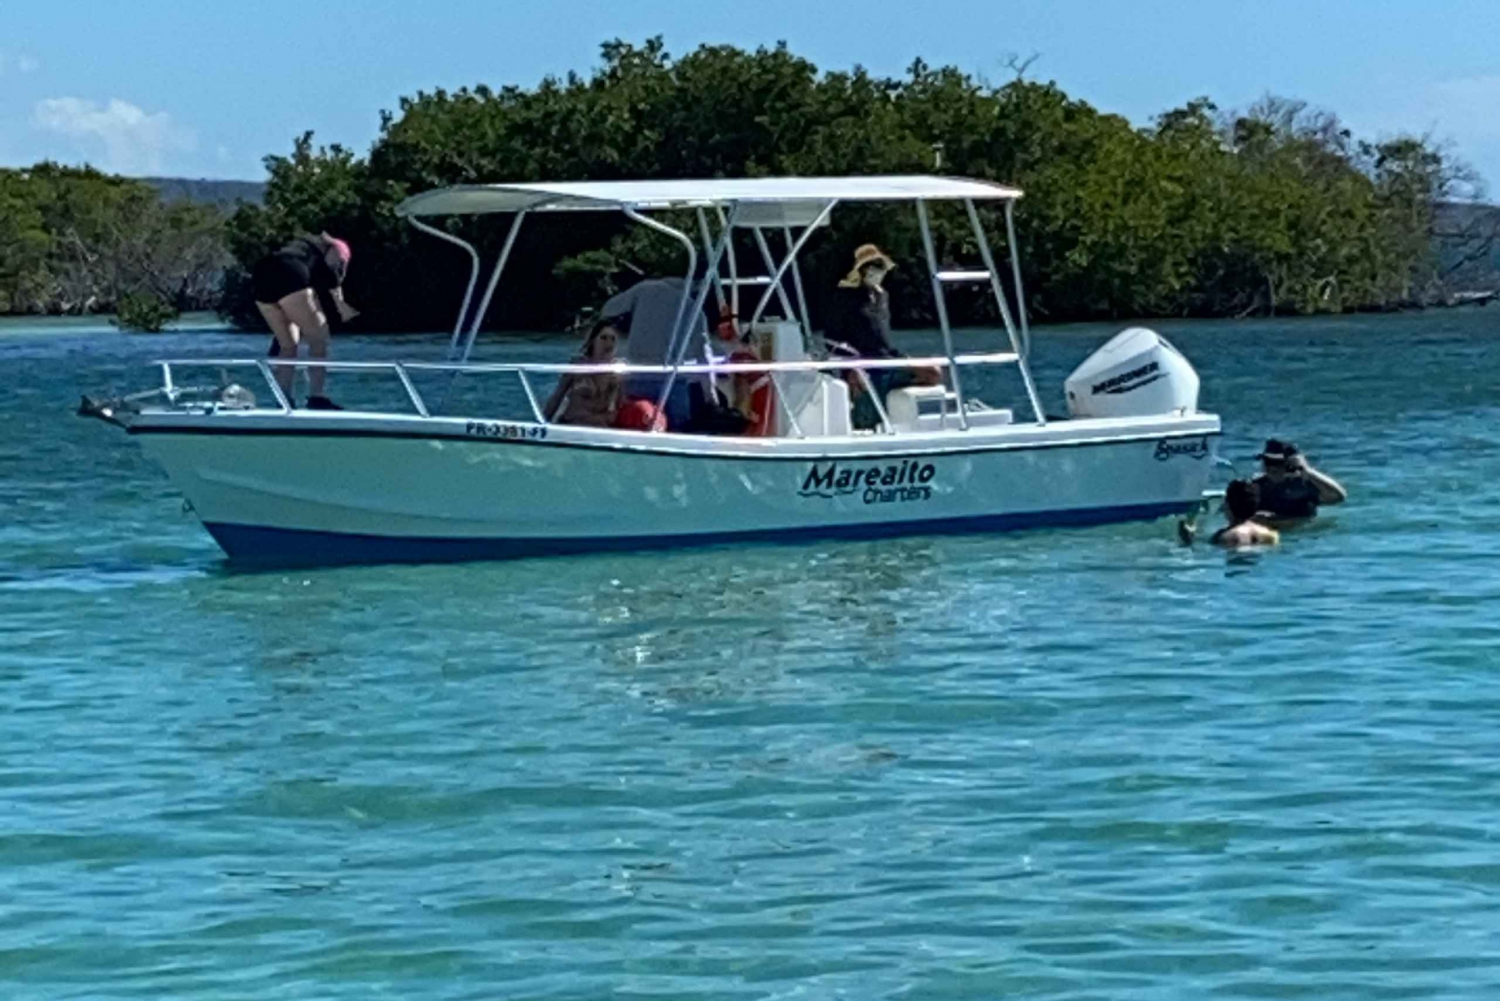 From La Parguera: Day Trip To A Local Sandbar By Boat